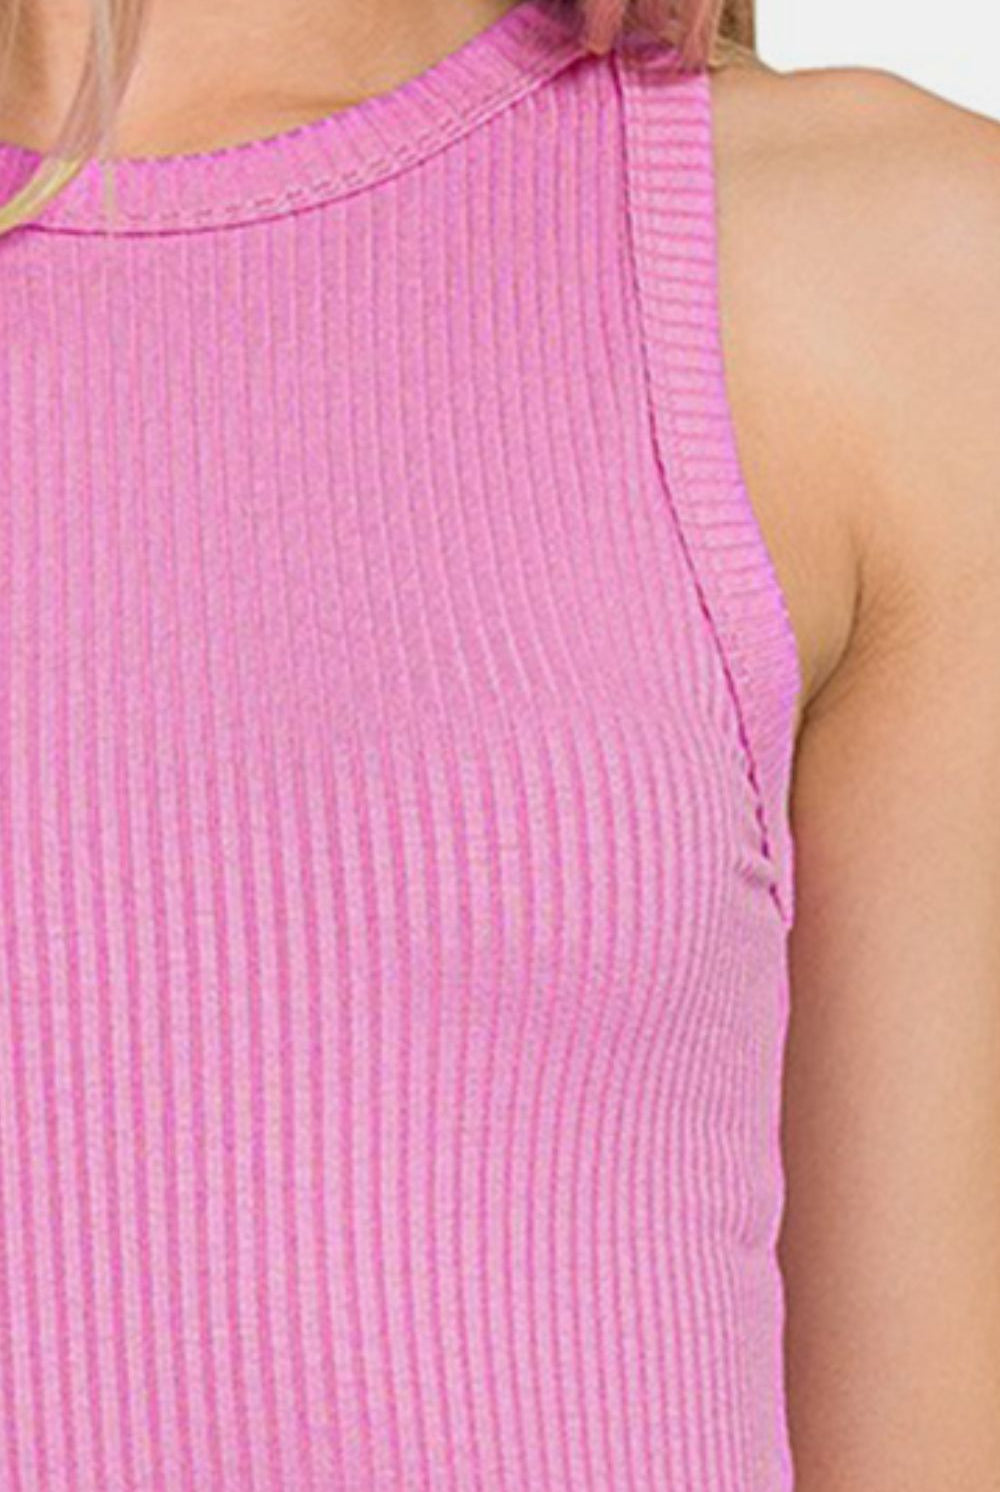 Model displaying a fitted mauve crew neck tank top